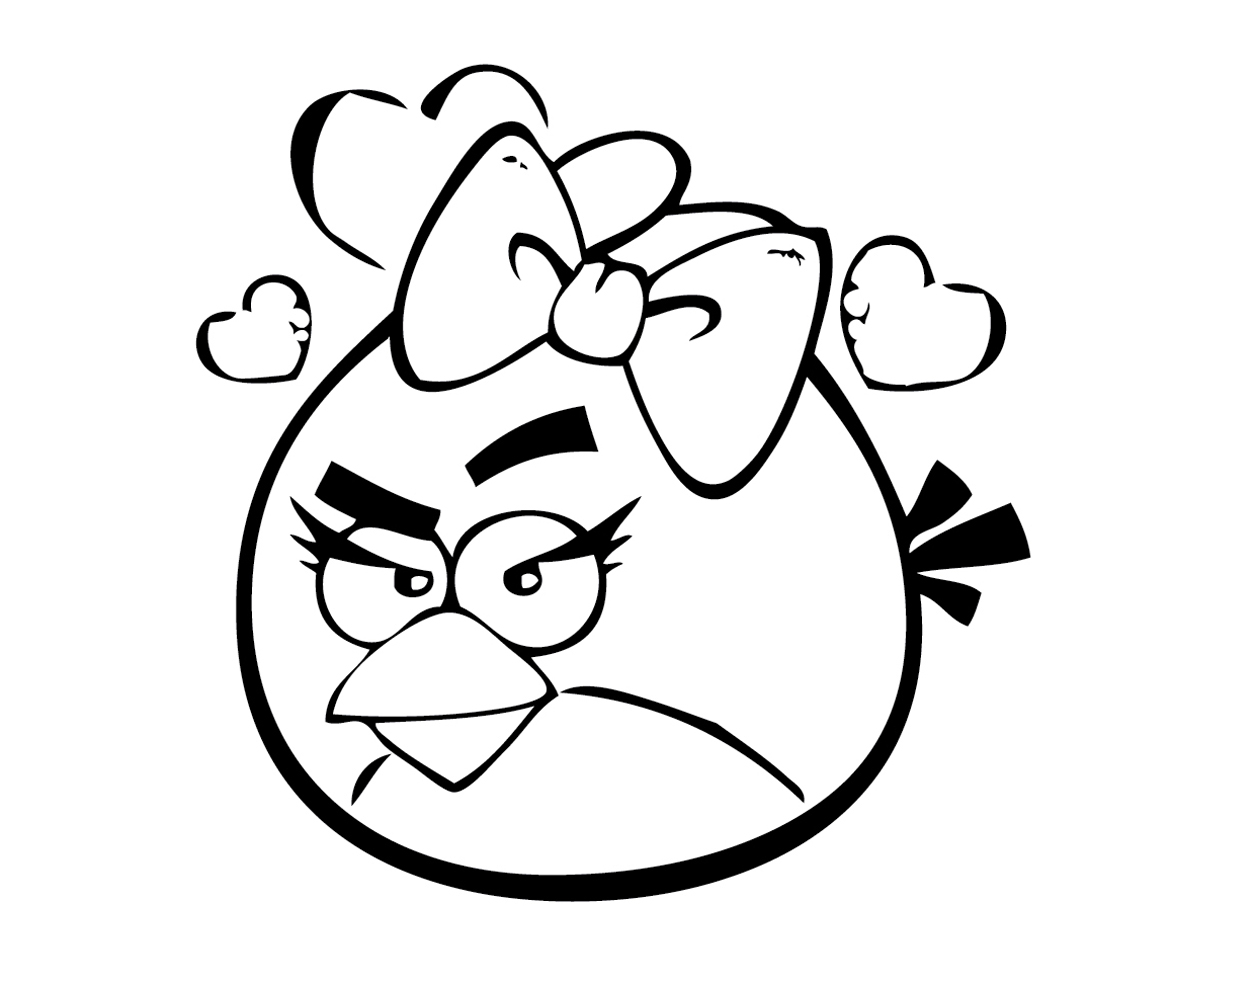 Image of Angry birds to print and color